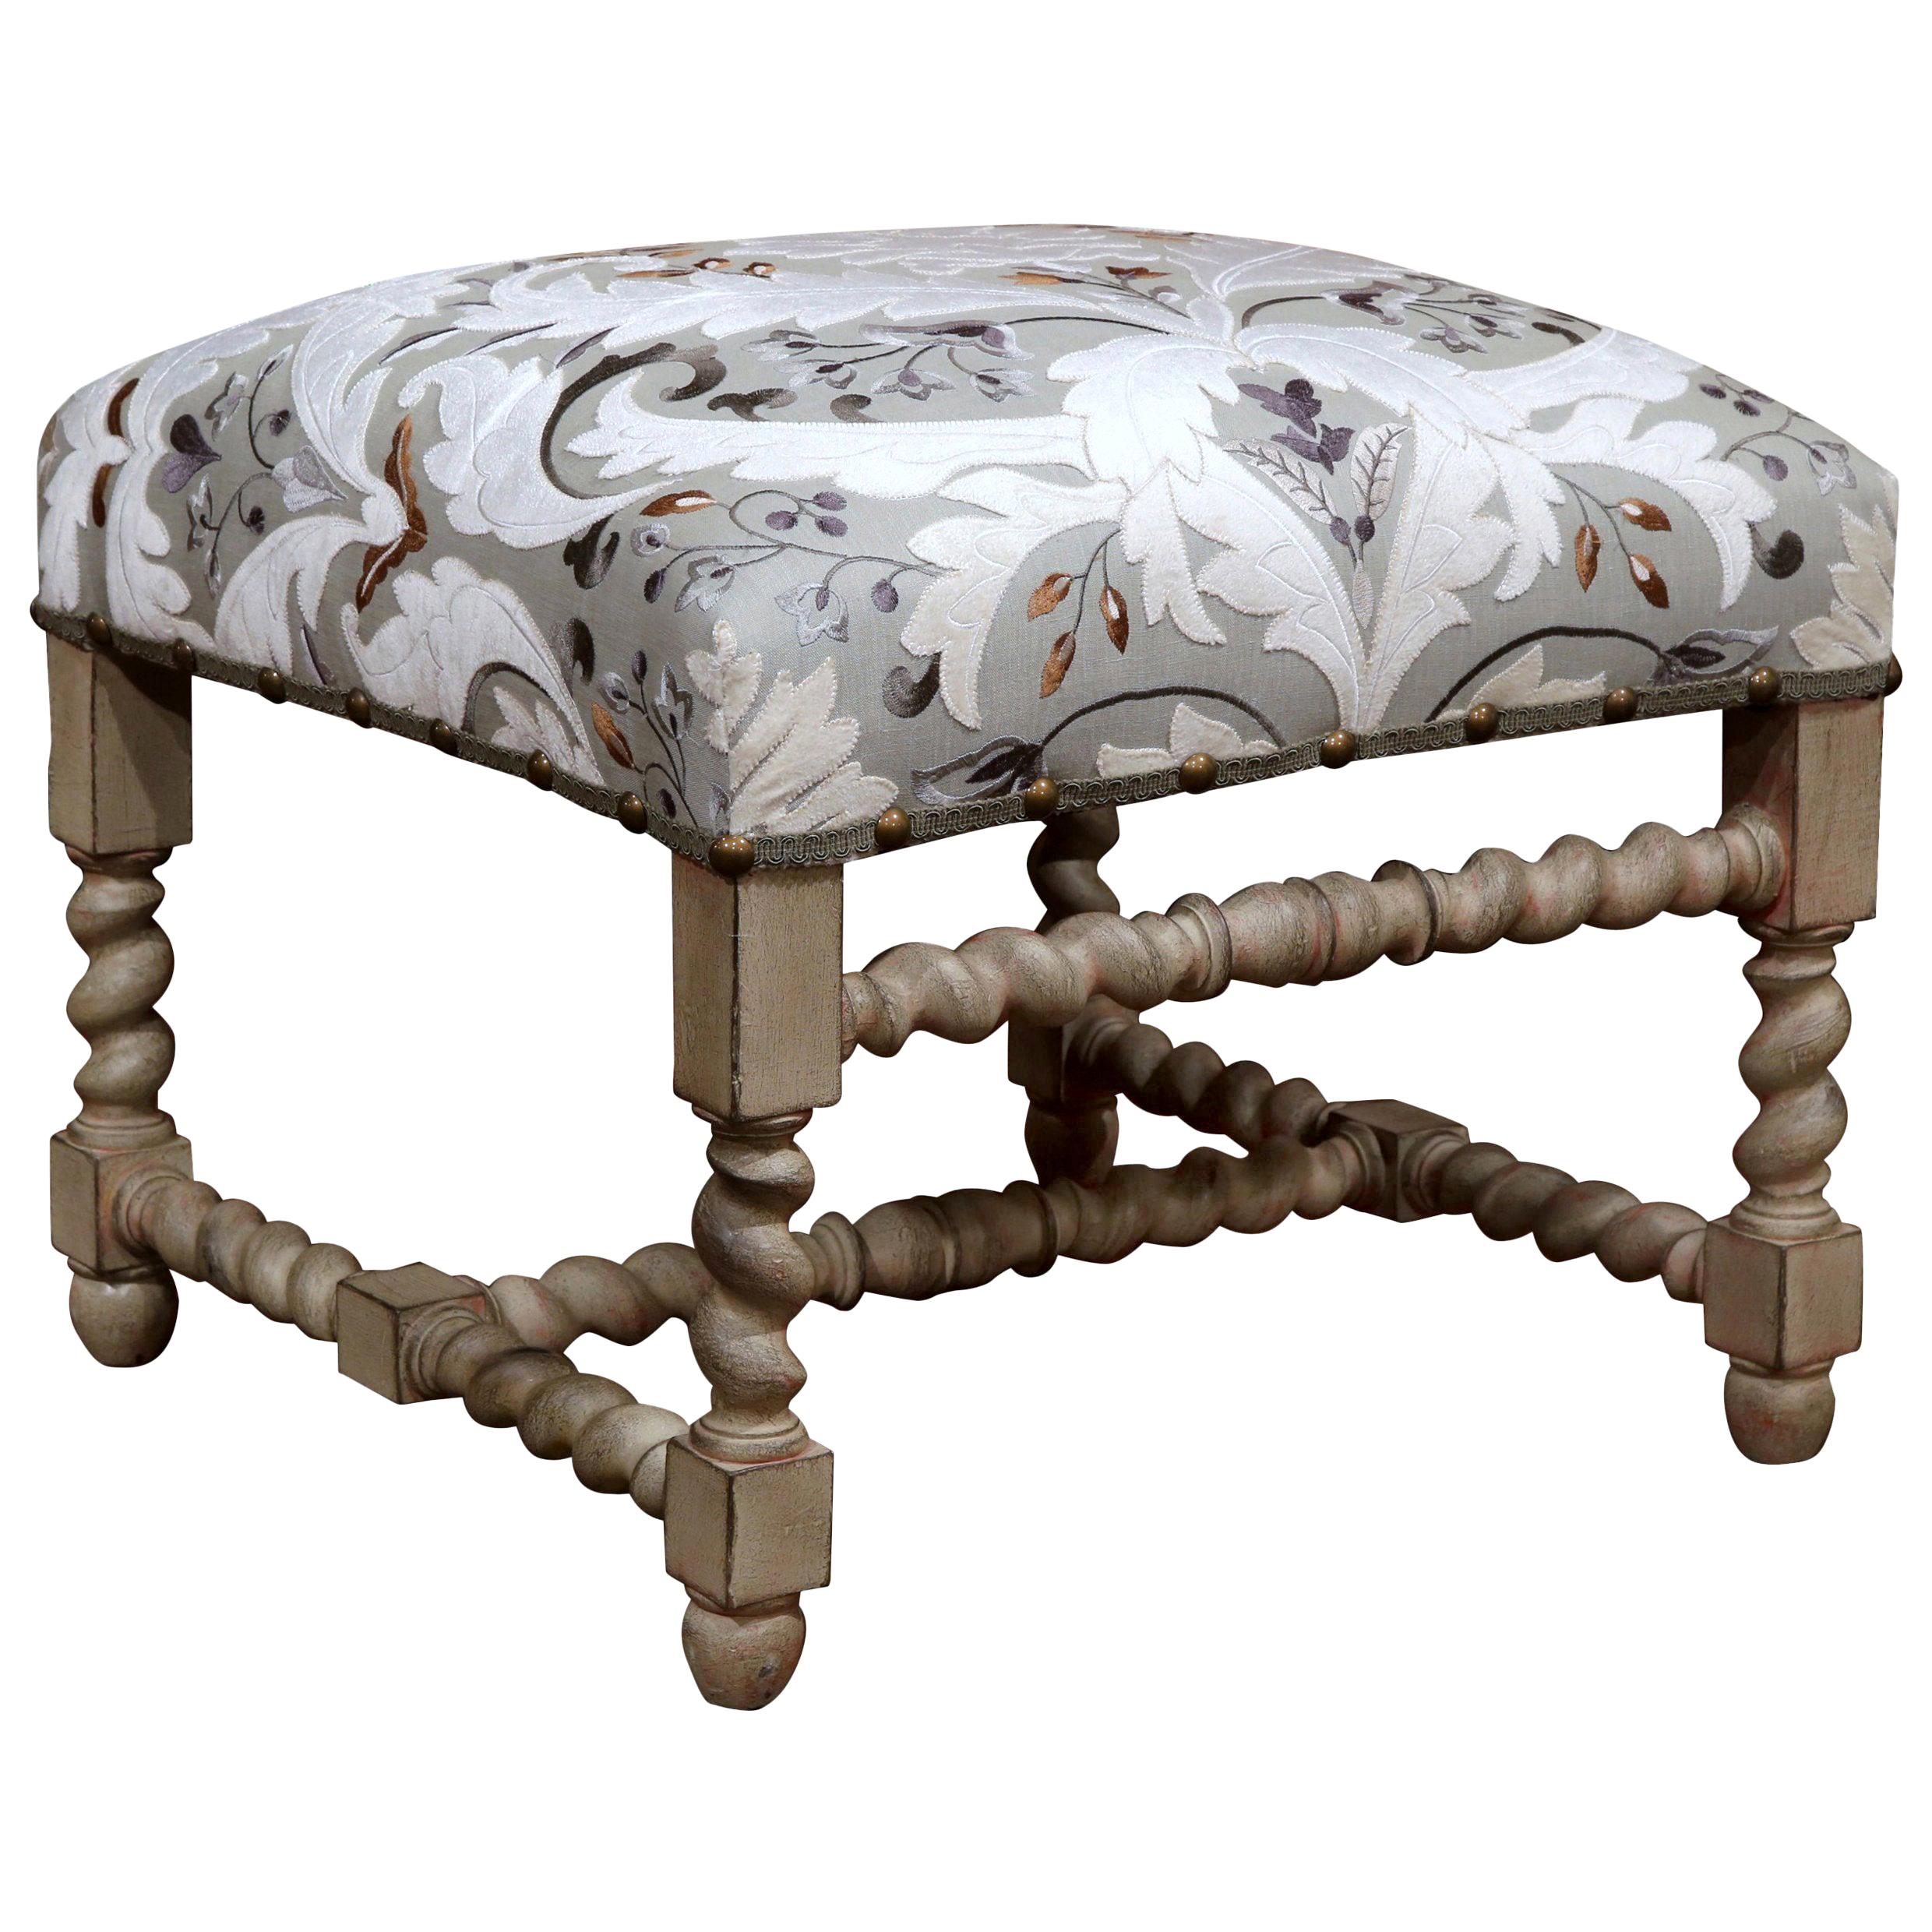 Early 20th Century French Carved Painted Stool with Embroidered Upholstery